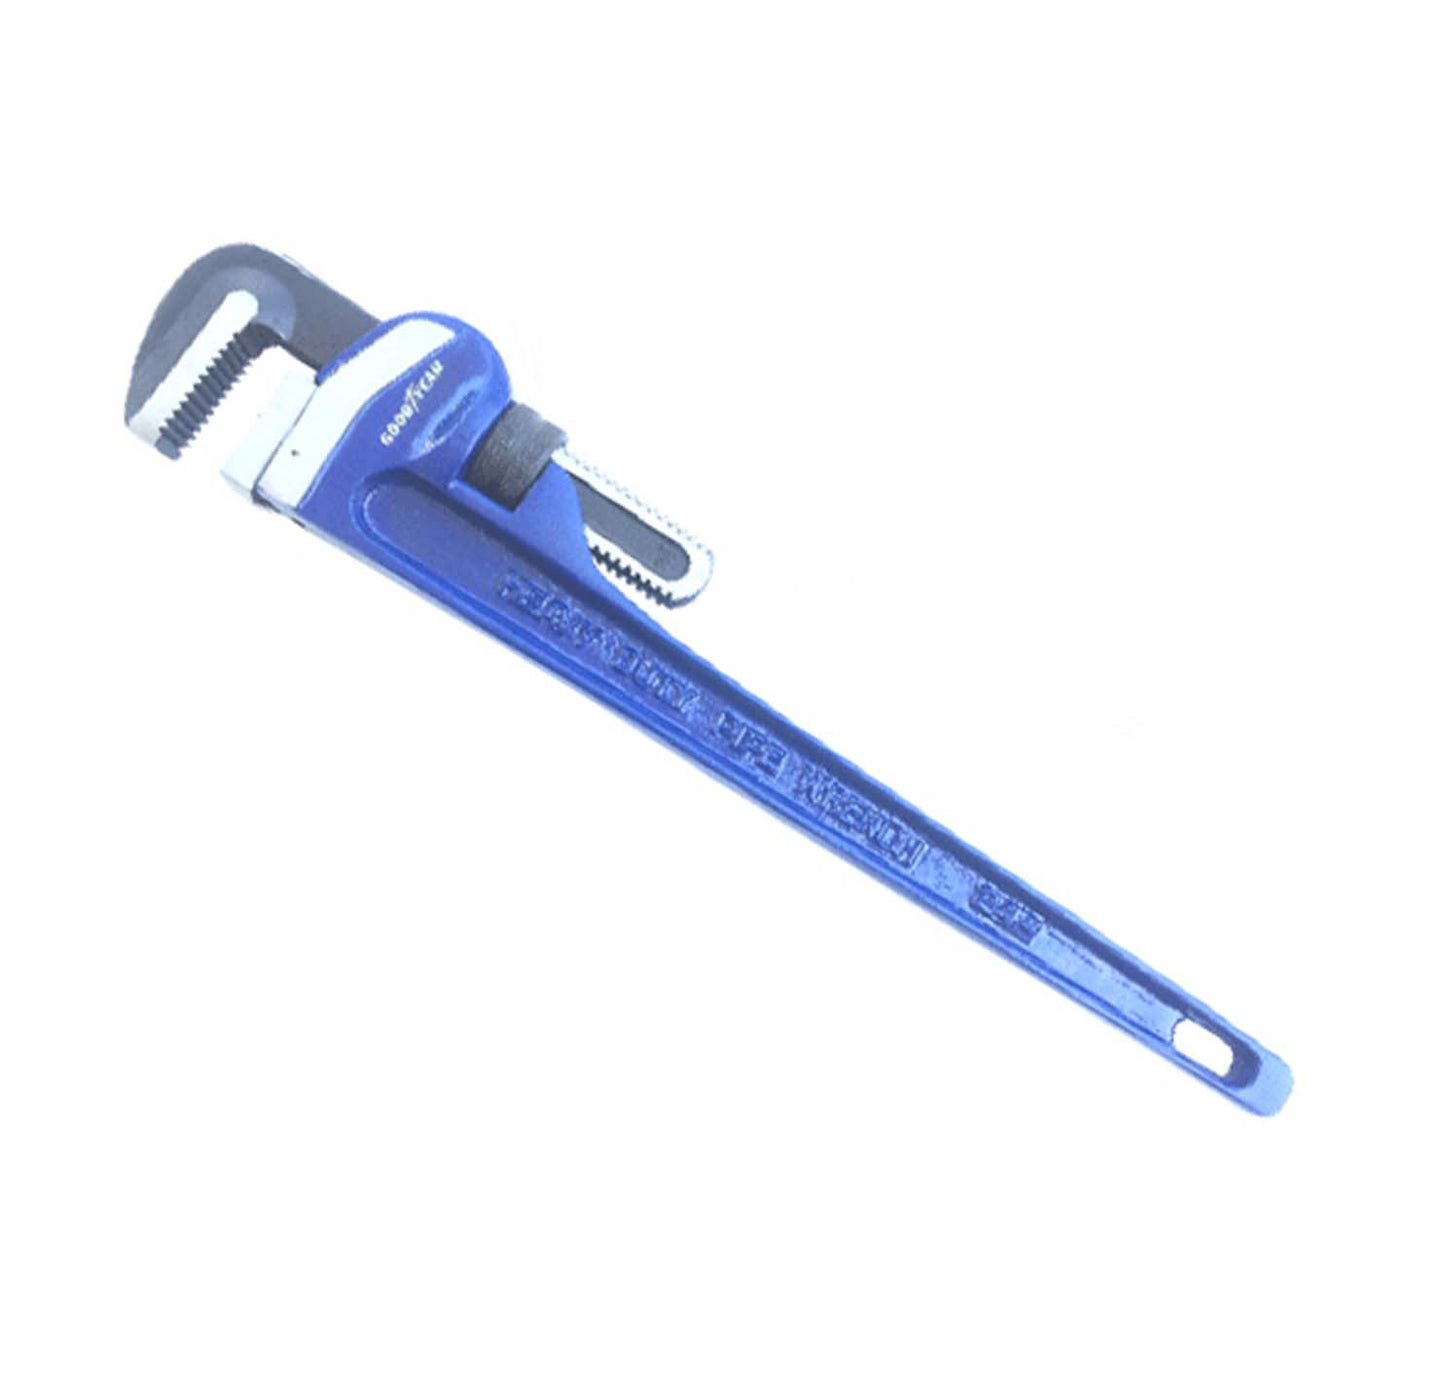 Goodyear Pipe Wrench Rigid Type With Extra Heavy Duty